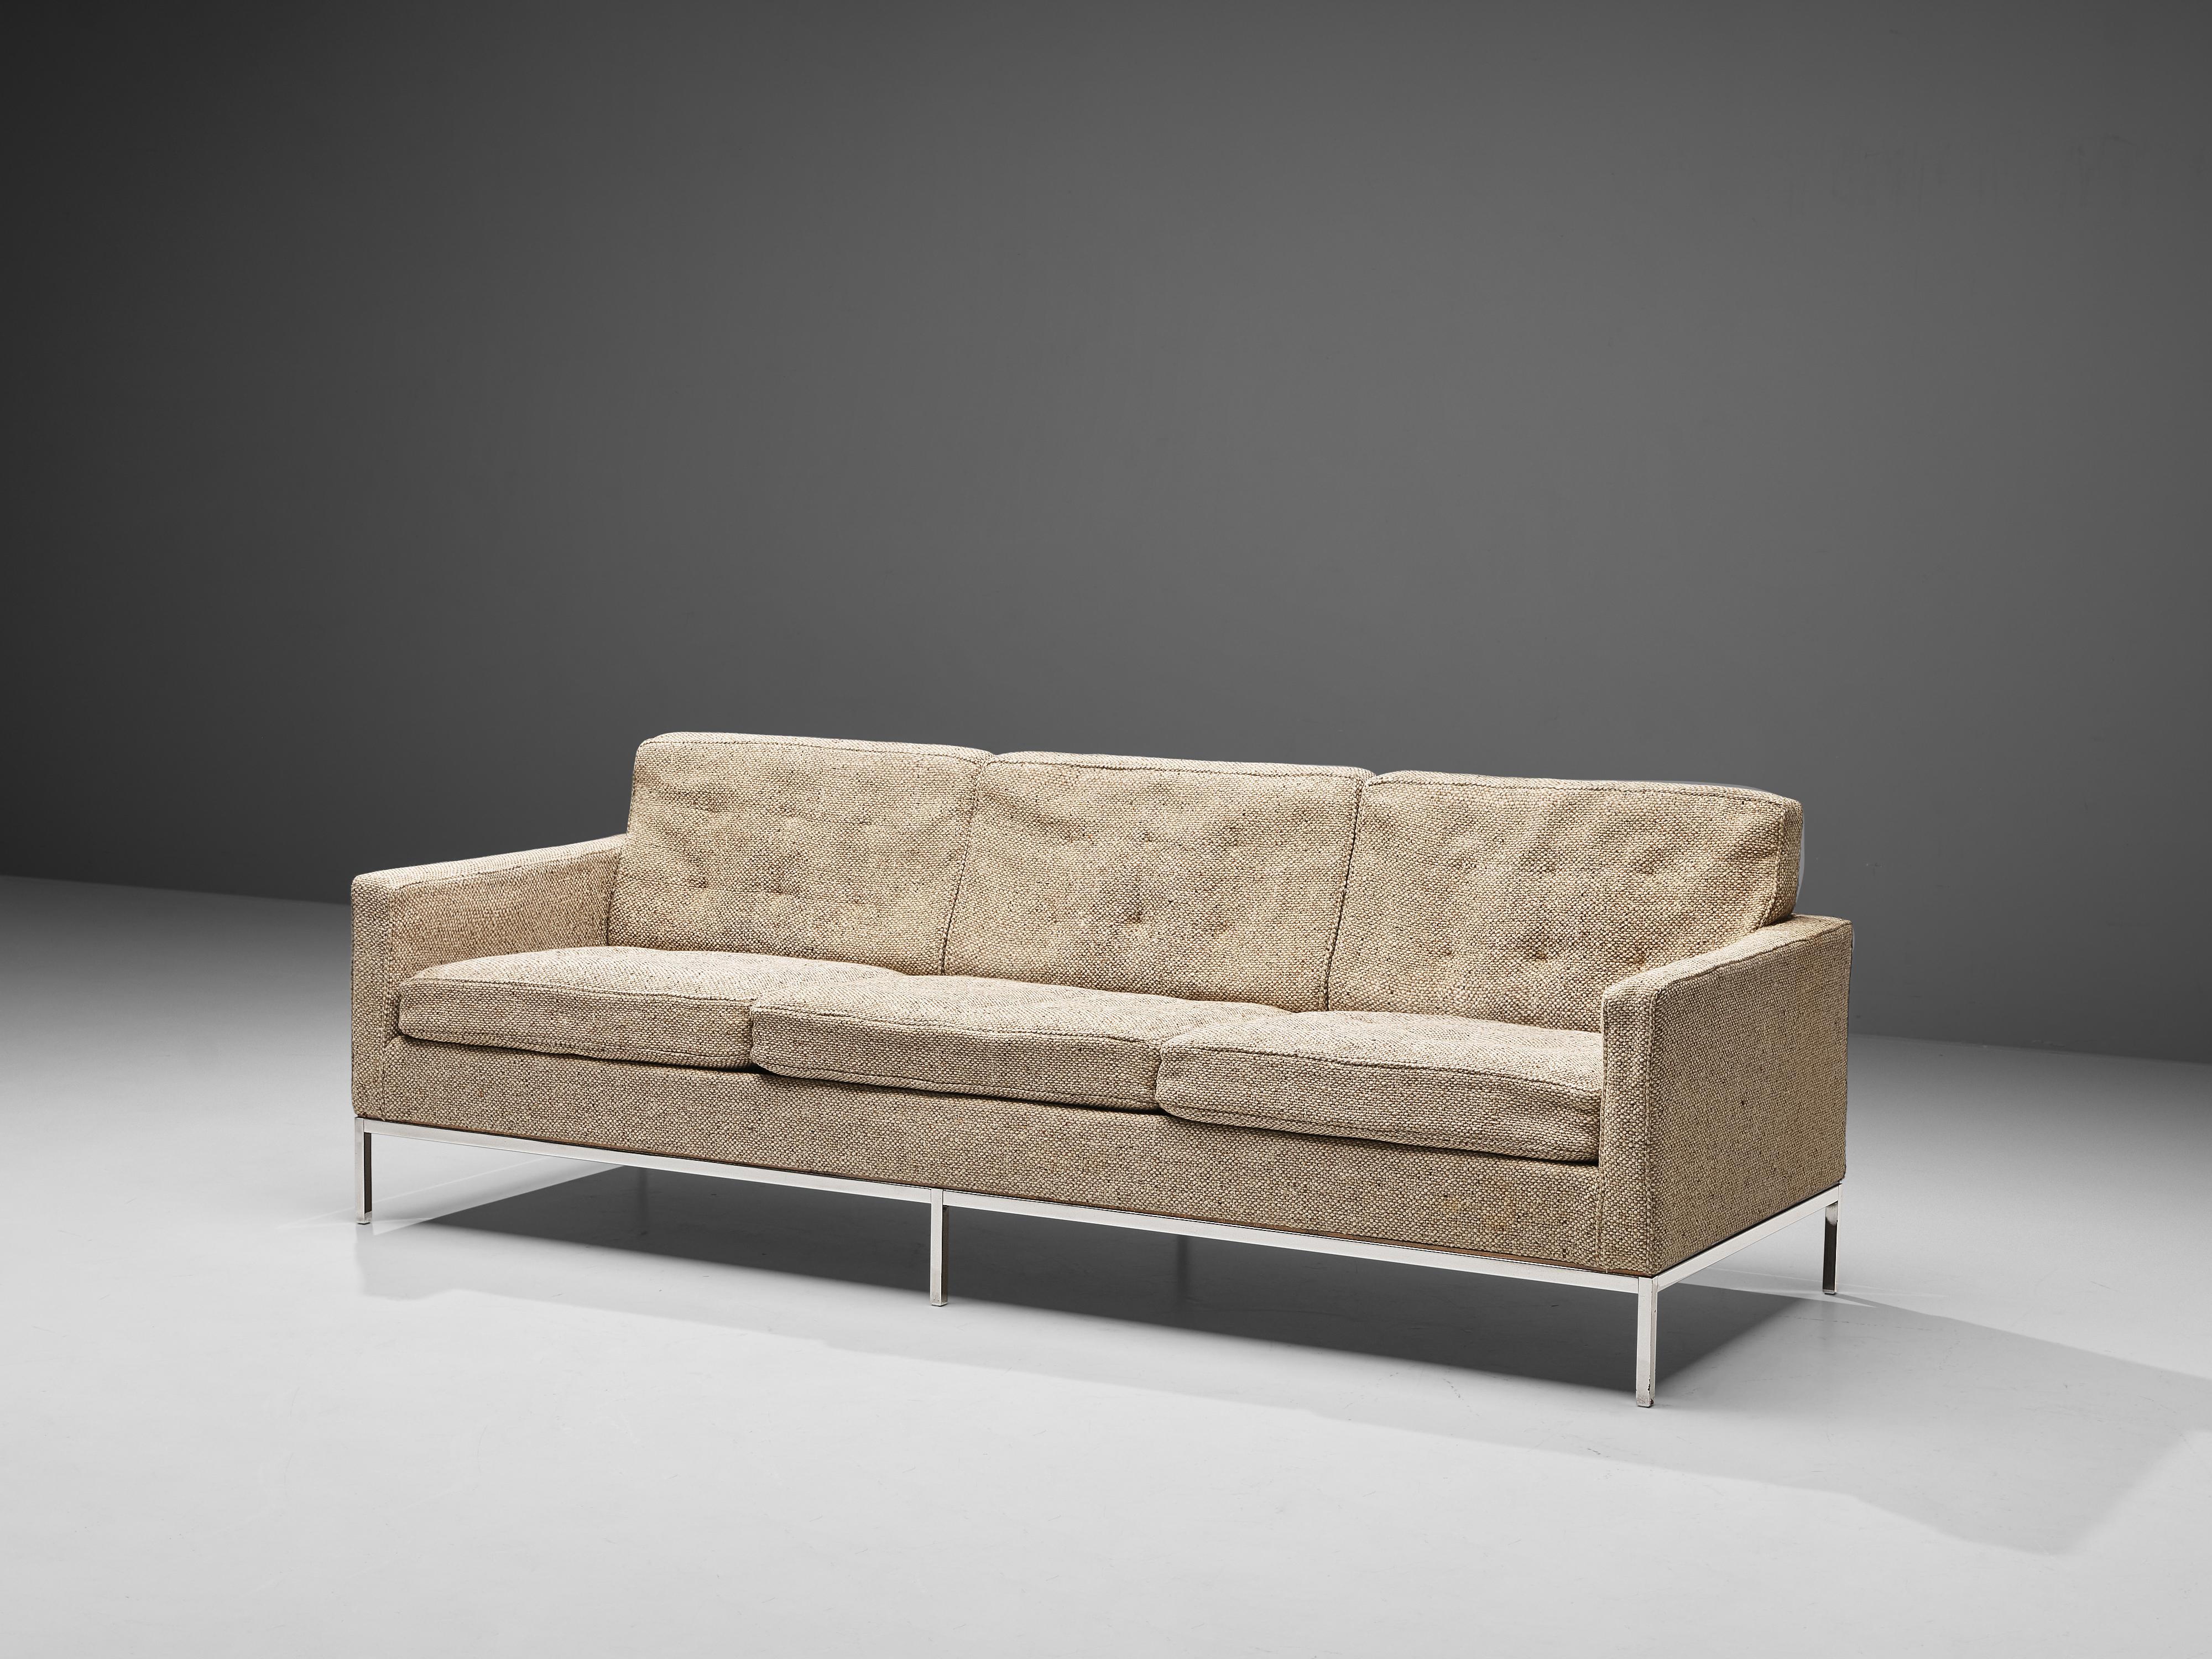 Artifort, sofa model '905', chrome-plated metal, wool, The Netherlands, 1964

The Artifort sofa model '905' was designed by the company in 1964. Although the design was created in the sixties, thanks to its very modest and clean look, it still feels